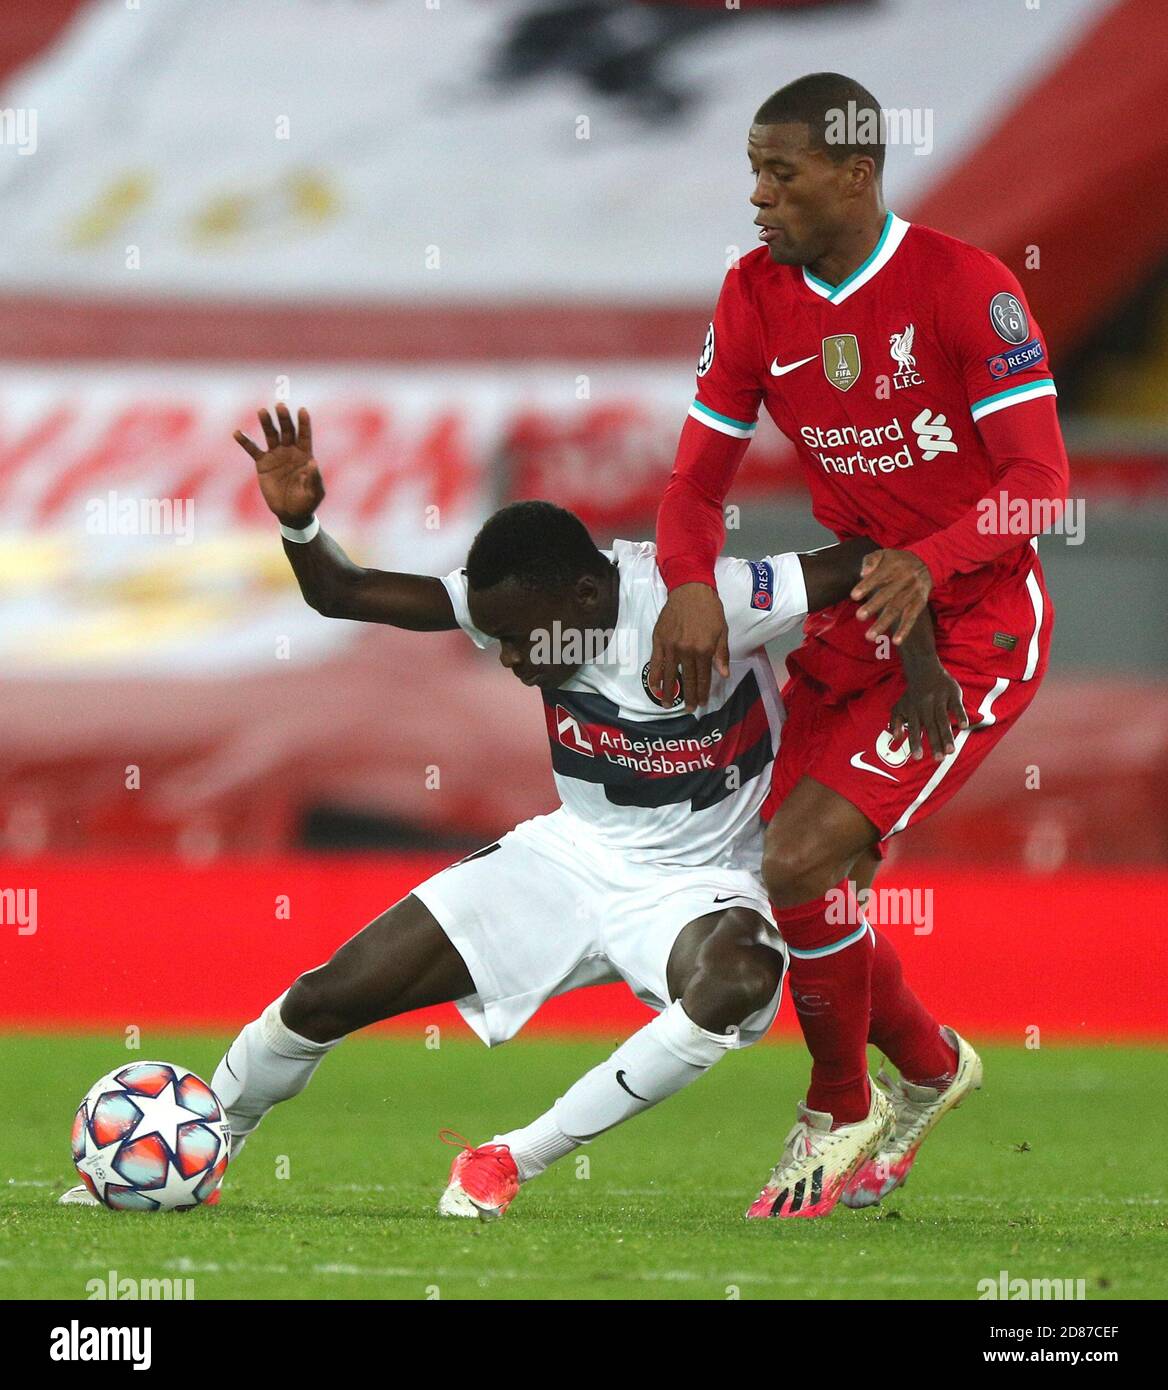 FC Midtjylland's Pione Sisto (left) and Liverpool's Georginio Wijnaldum battle for the ball during the UEFA Champions League Group D match at Anfield, Liverpool. Stock Photo